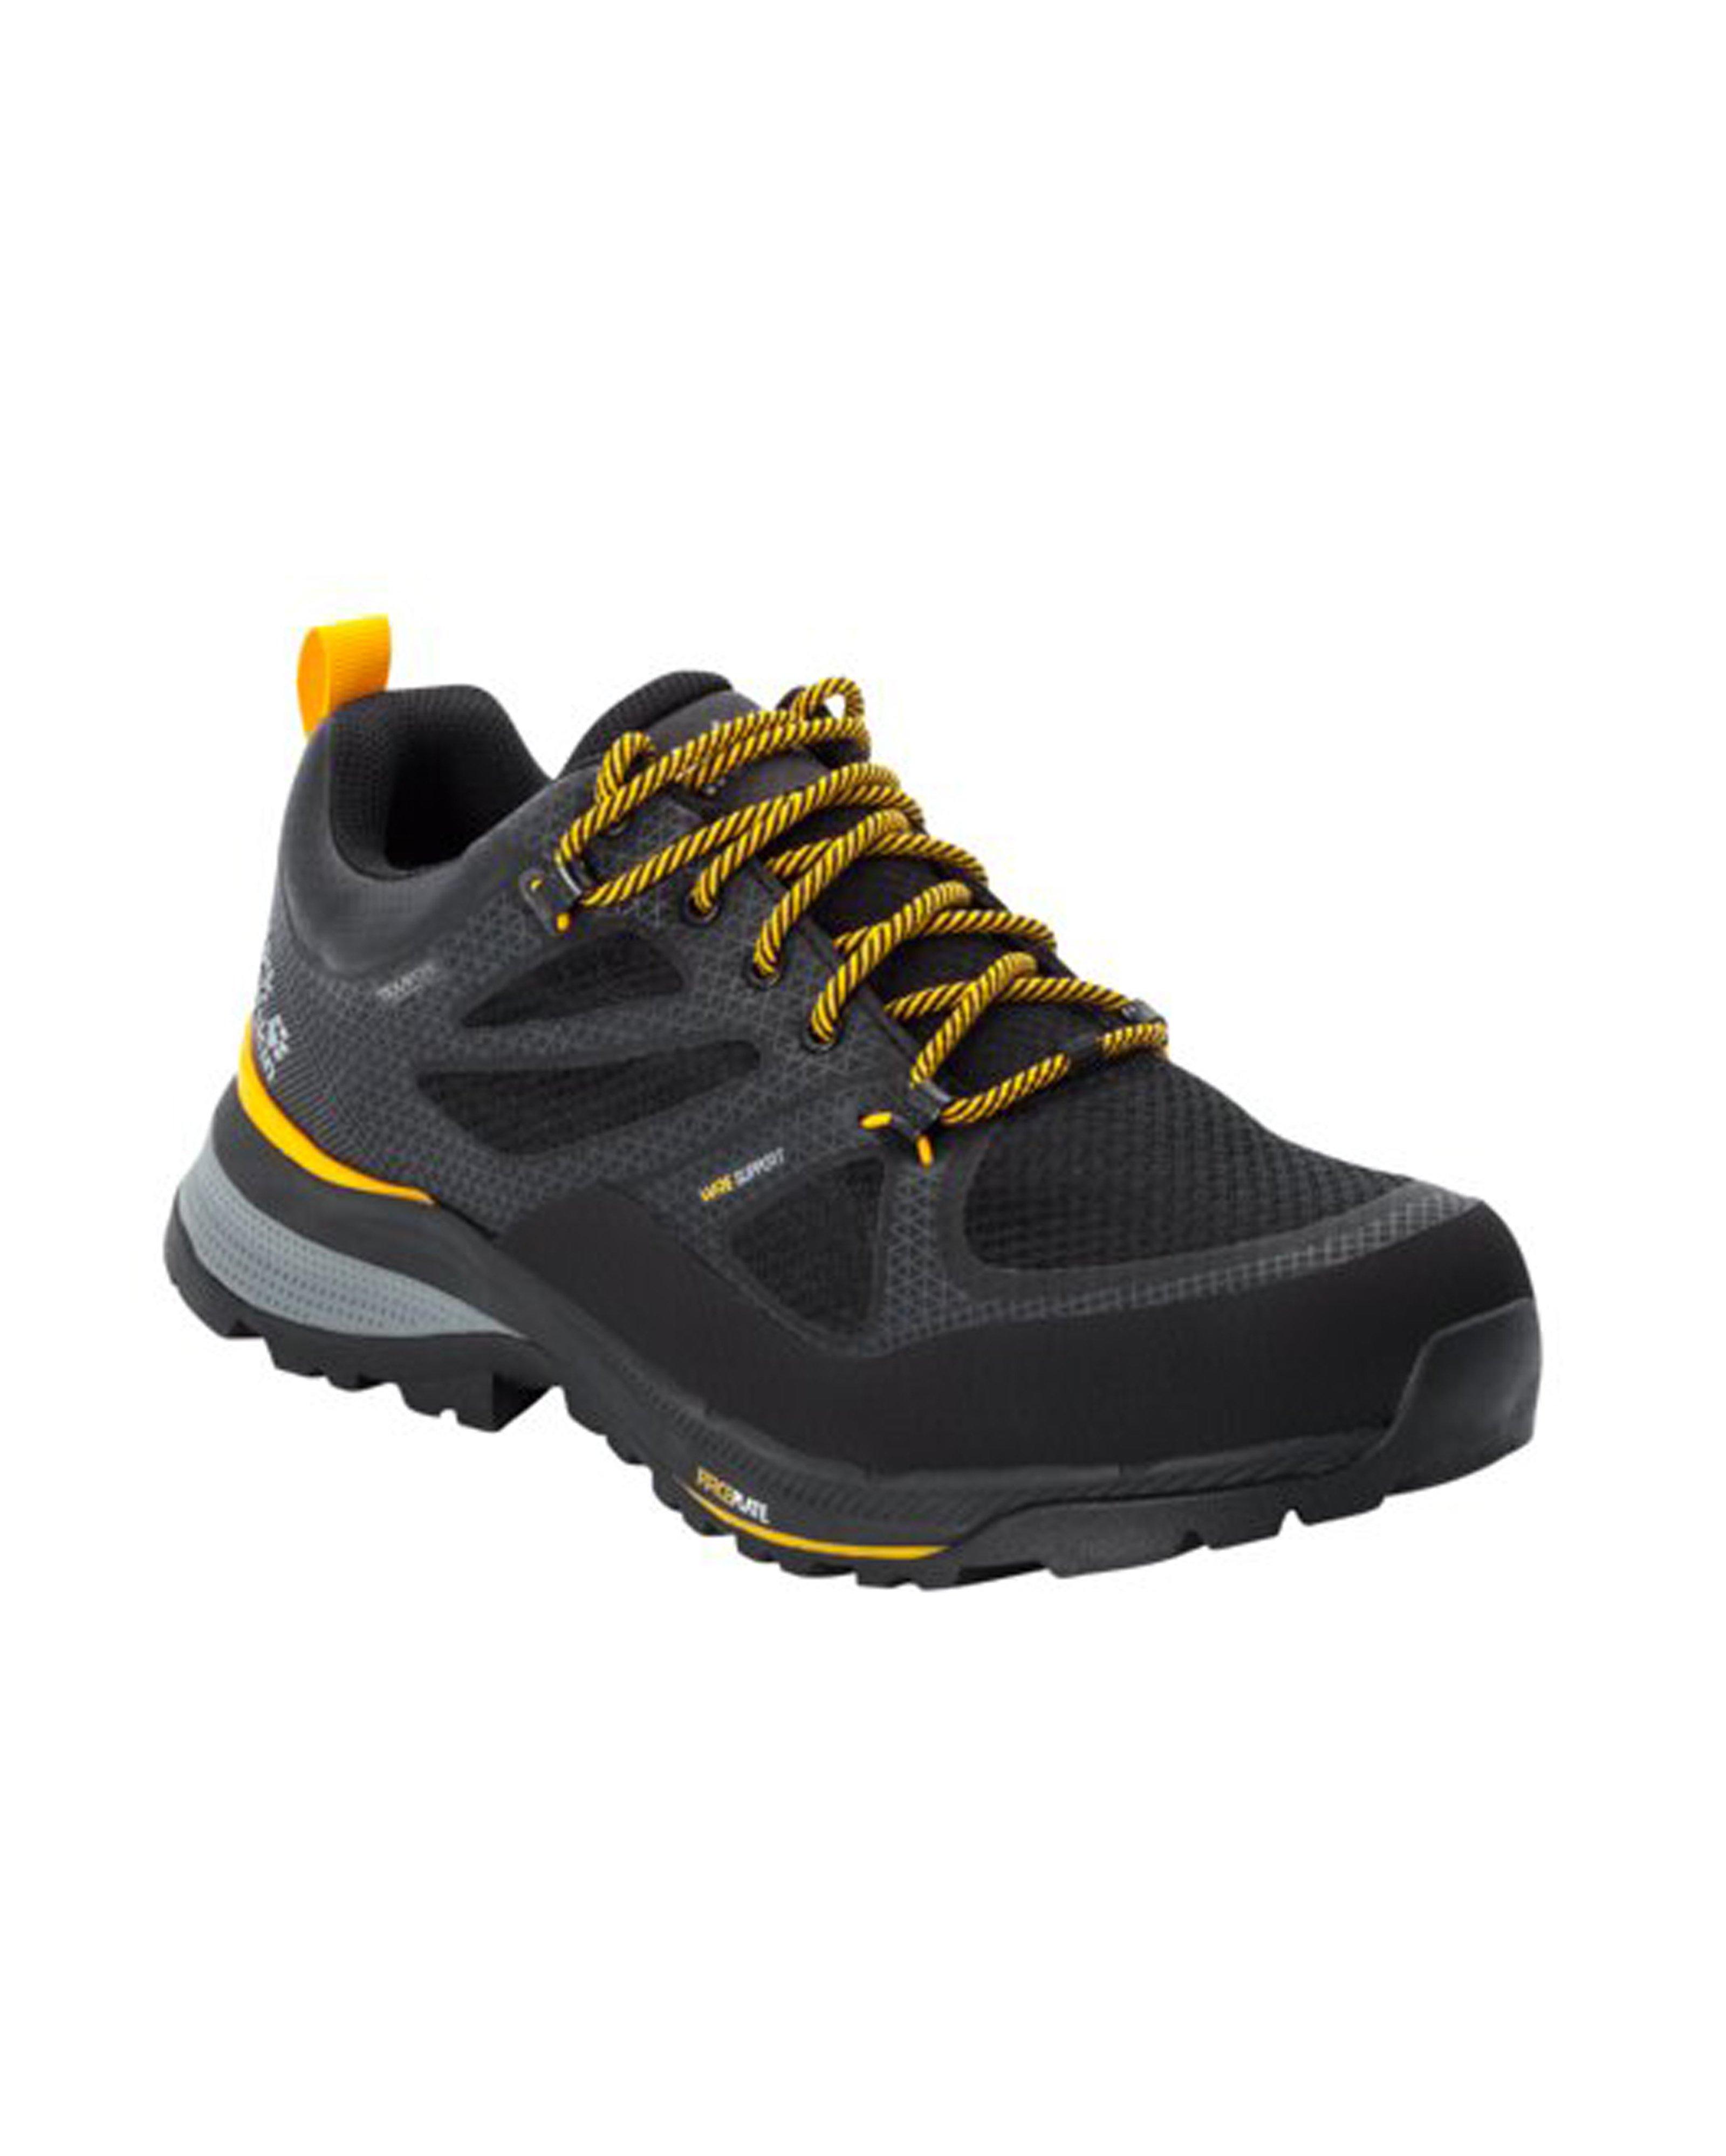 Jack Wolfskin Men’s Force Striker Texapore Low Hiking Shoes | Cape ...